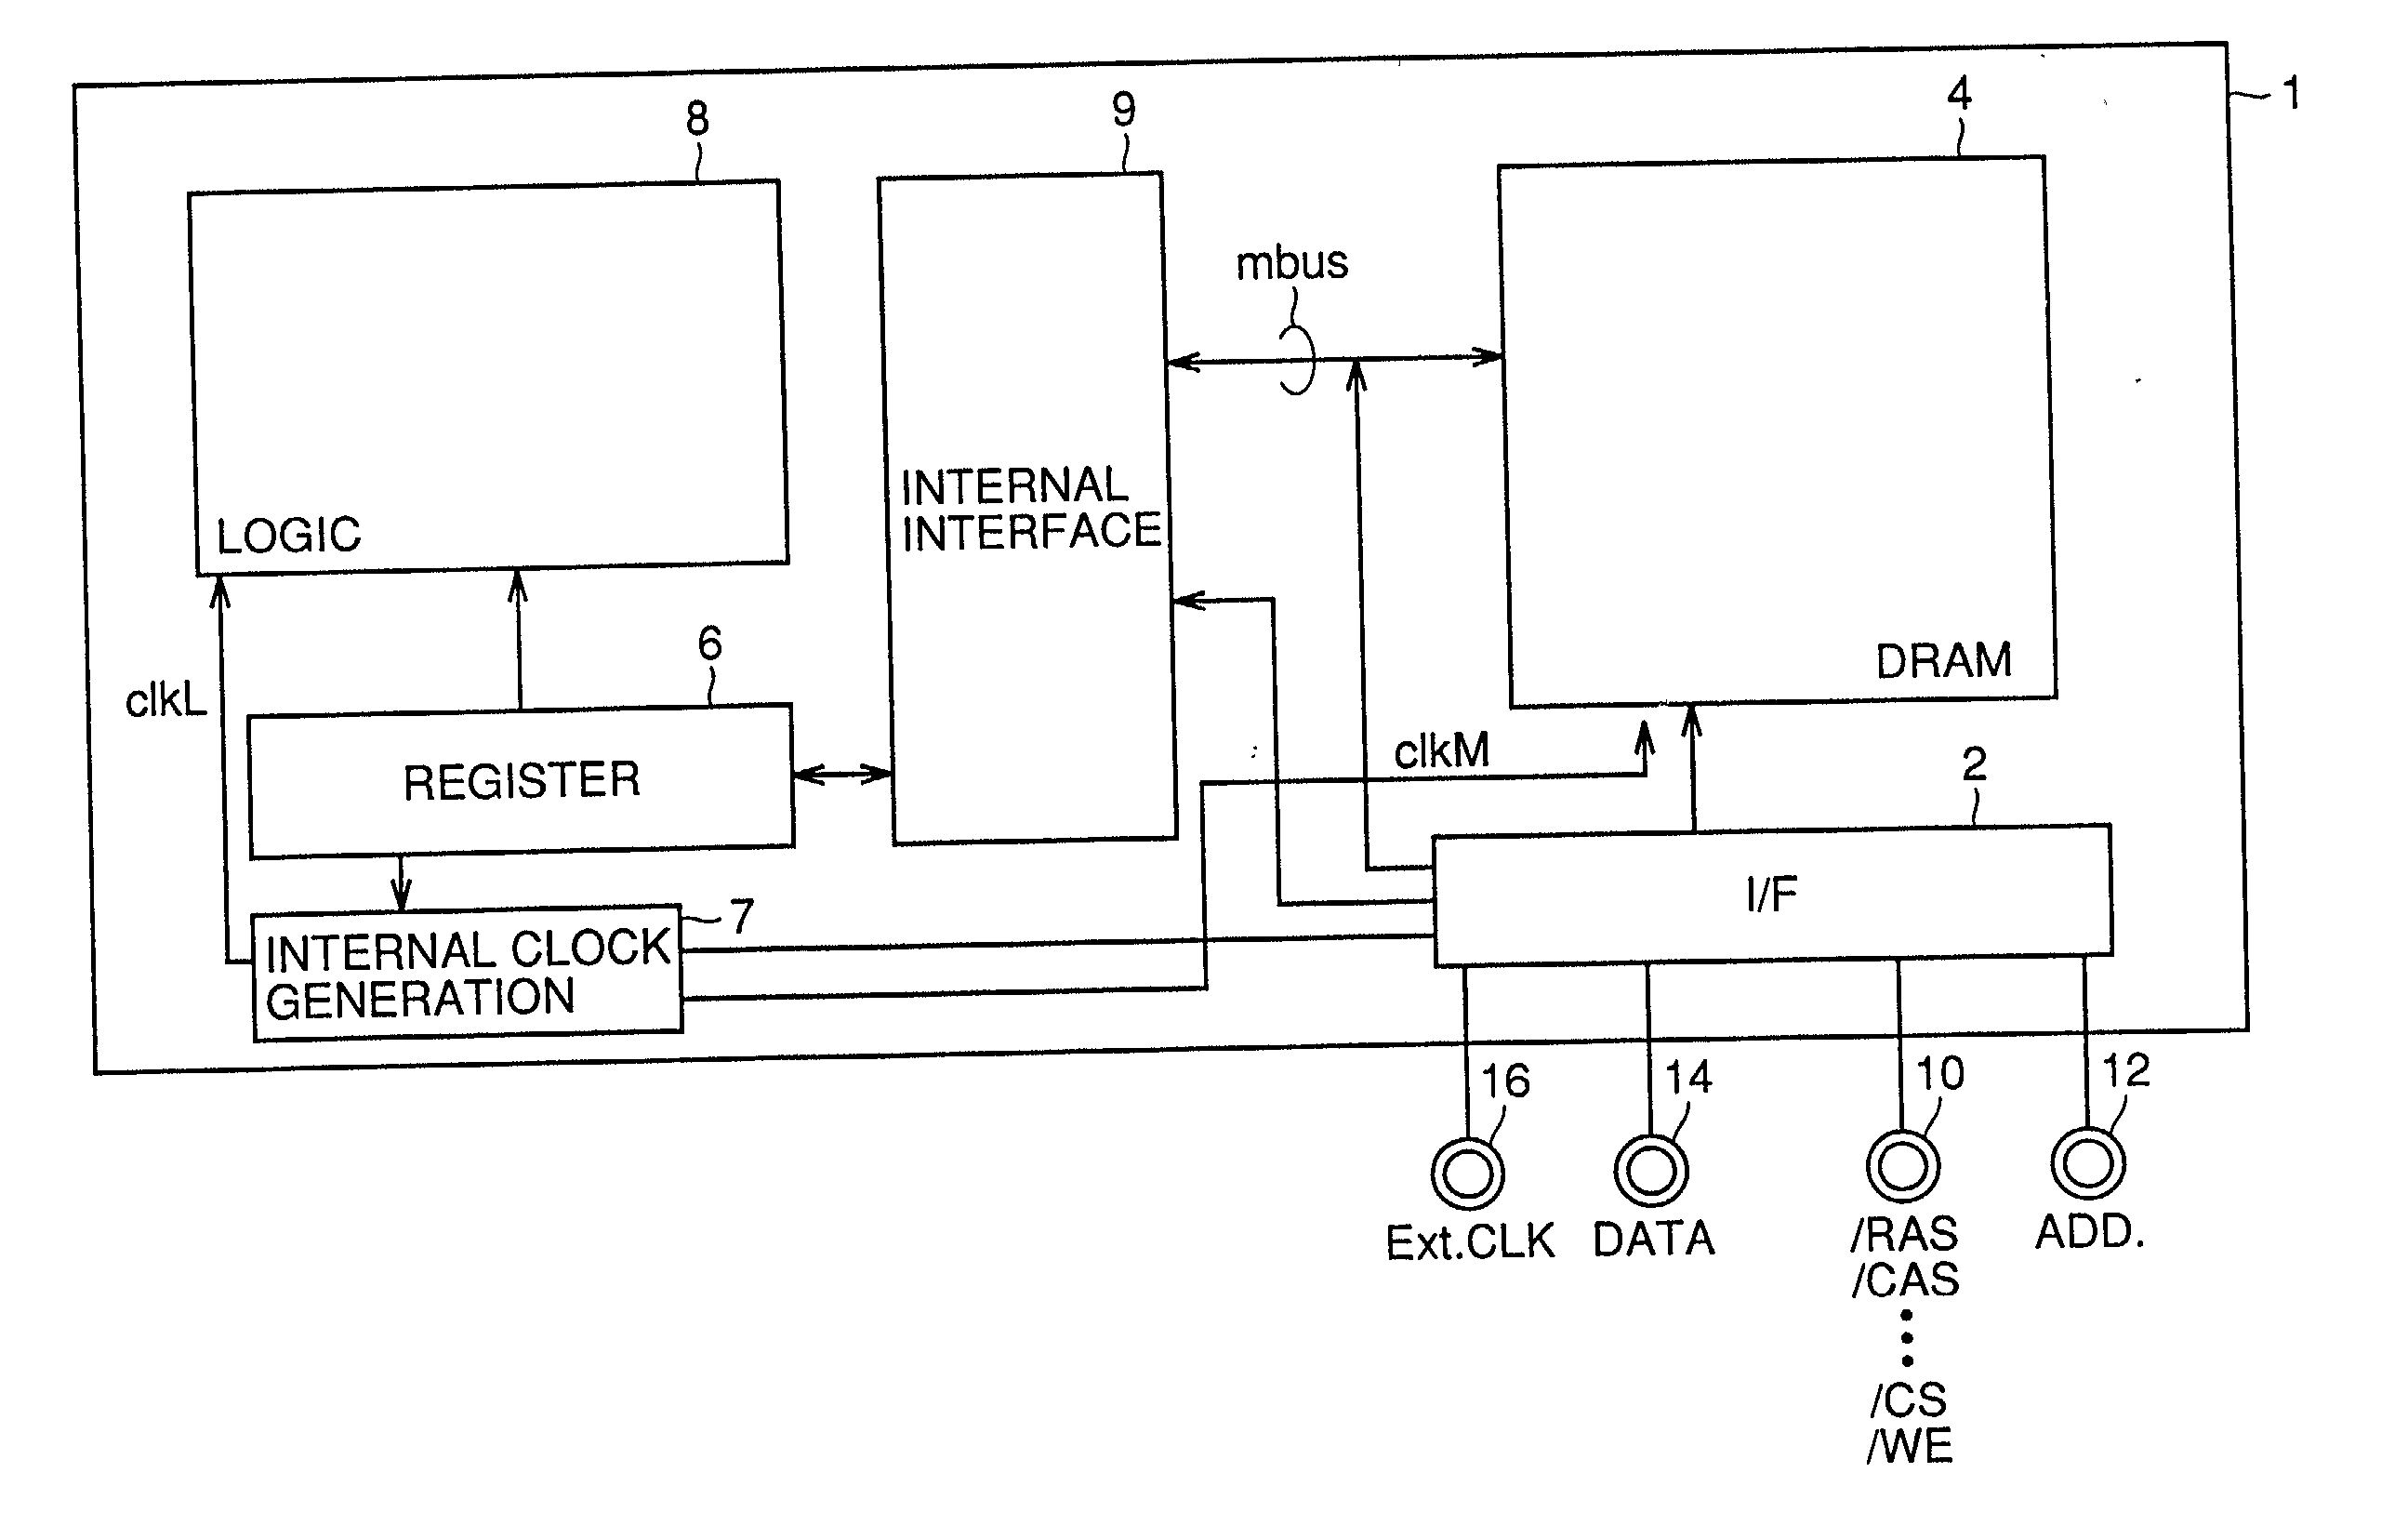 Simply interfaced semiconductor integrated circuit device including logic circuitry and embedded memory circuitry